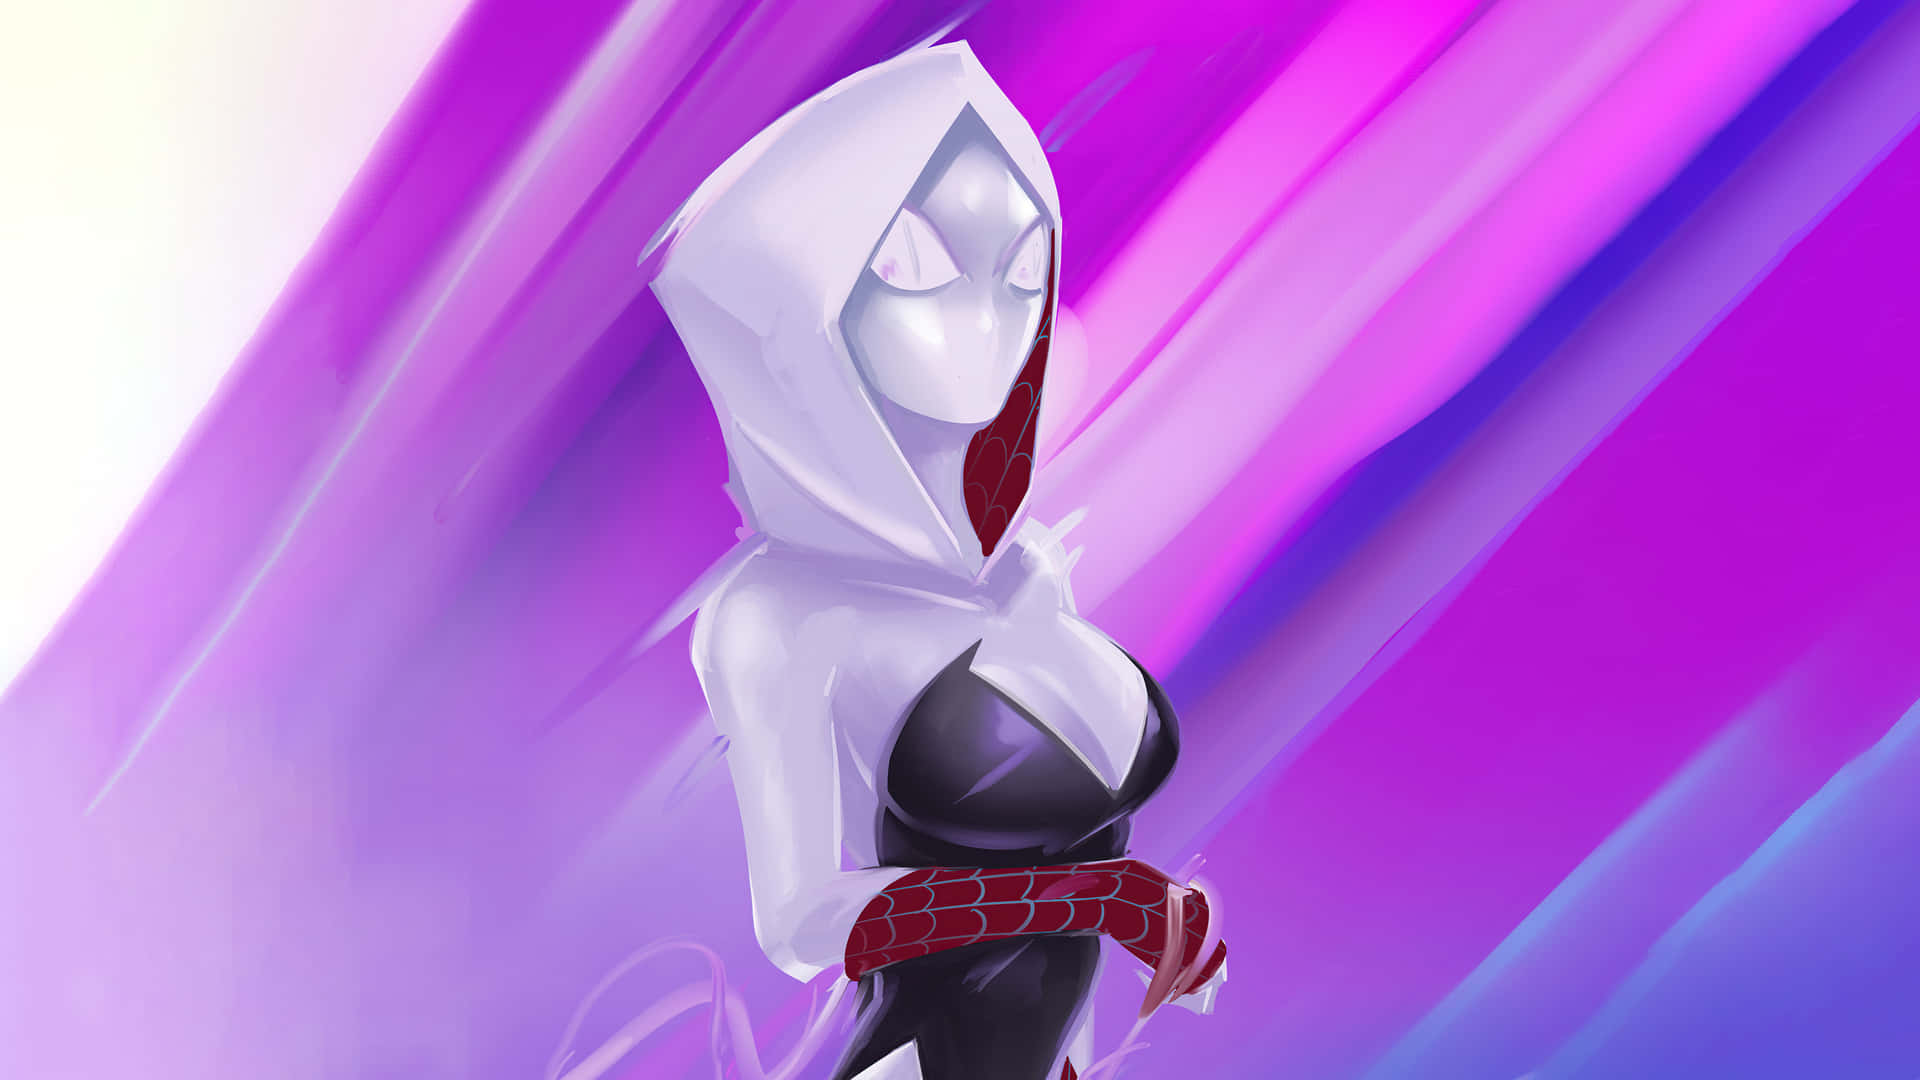 "Stand tall and do not fear, you have the incredible Spider Gwen powers, and you know how to use them."